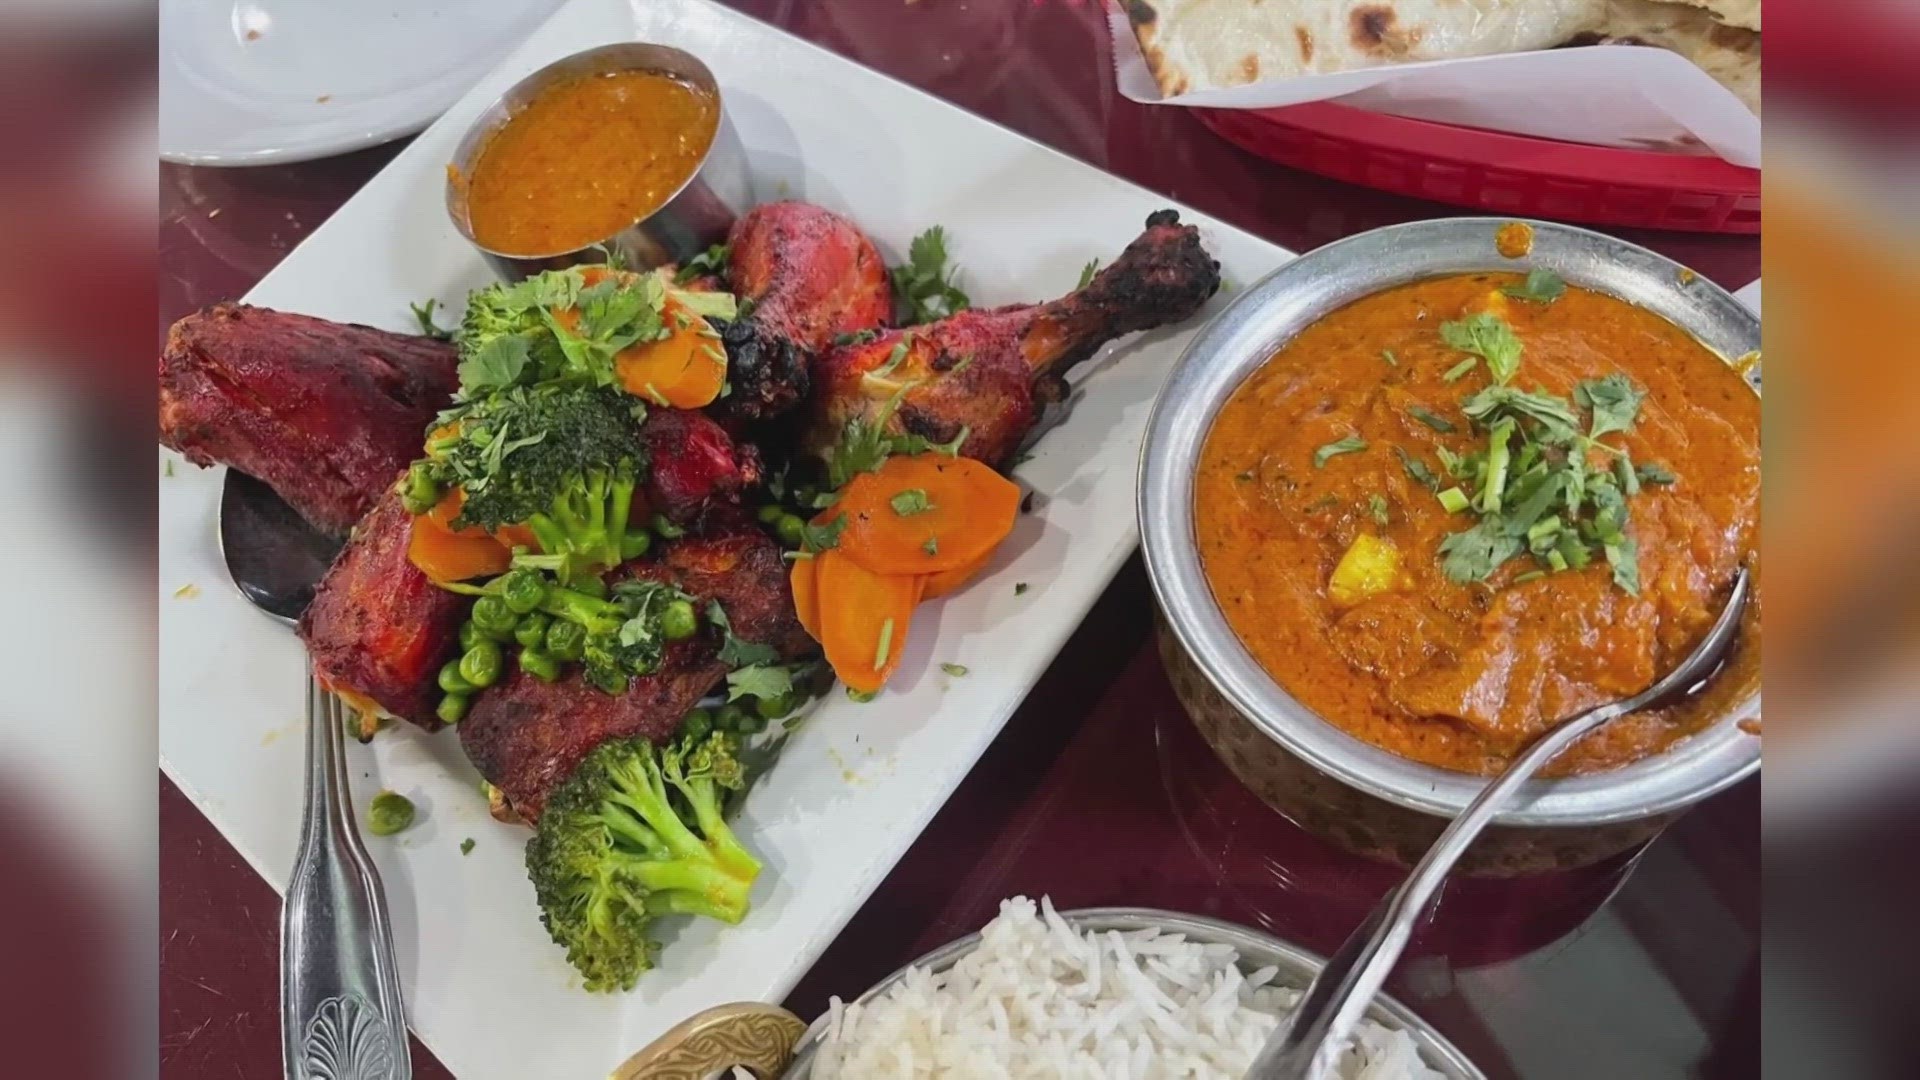 Our friends at 5280 Magazine share their guide of the best places to experience Indian food around the Denver metro area.